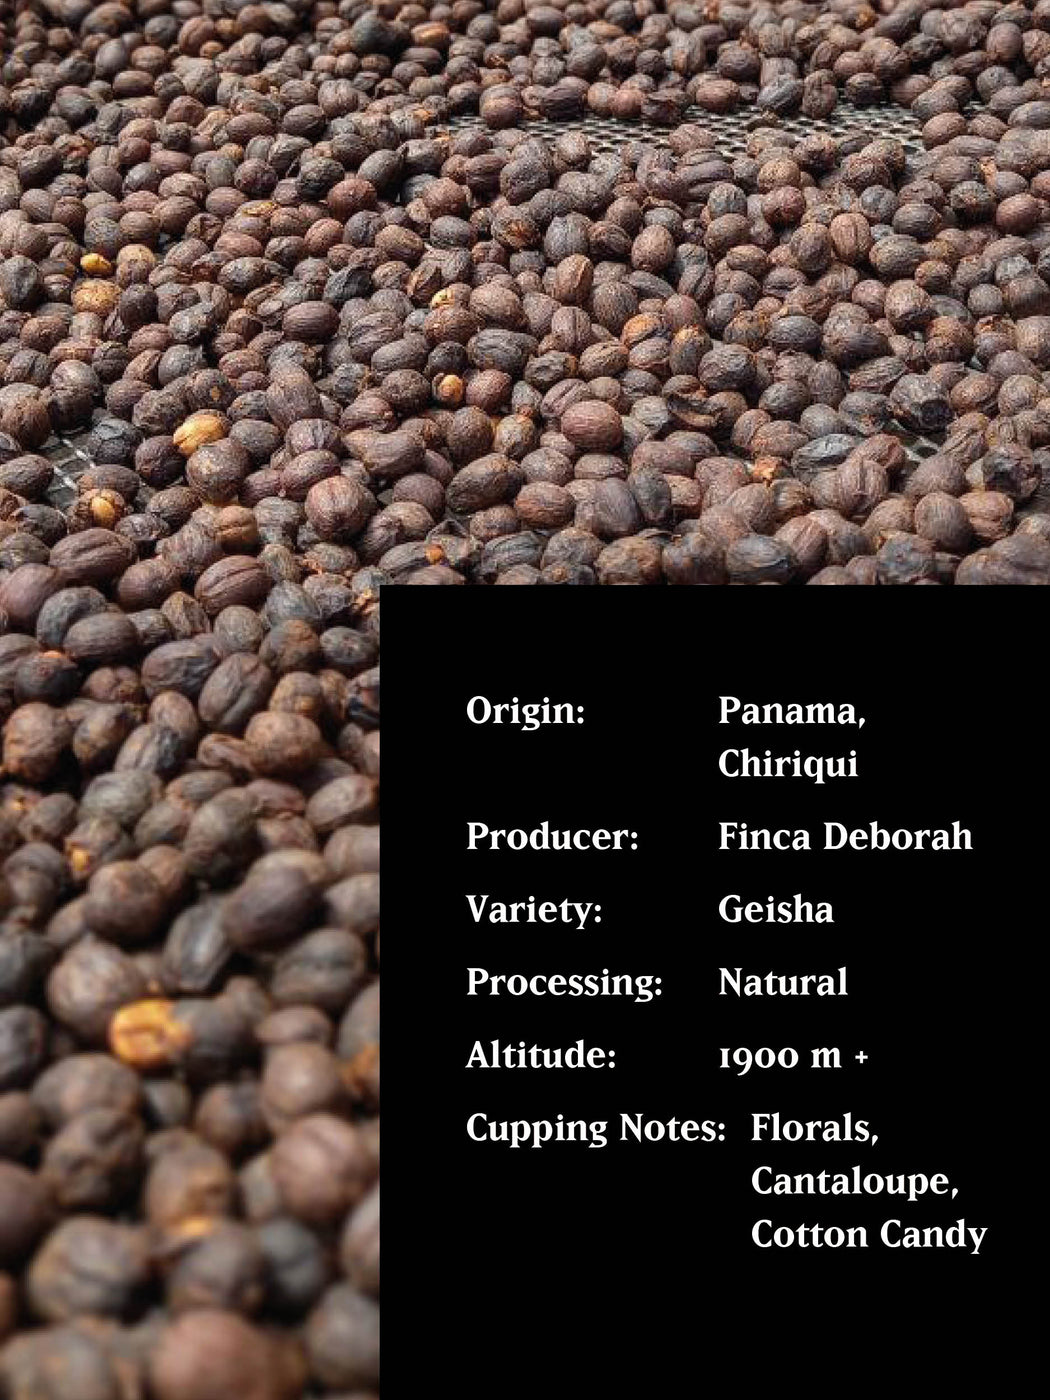 *G O A T  EDITION* 100 G - FINCA DEBORAH AFTERGLOW, PANAMA, NATURAL - PRE-ORDER ONLY